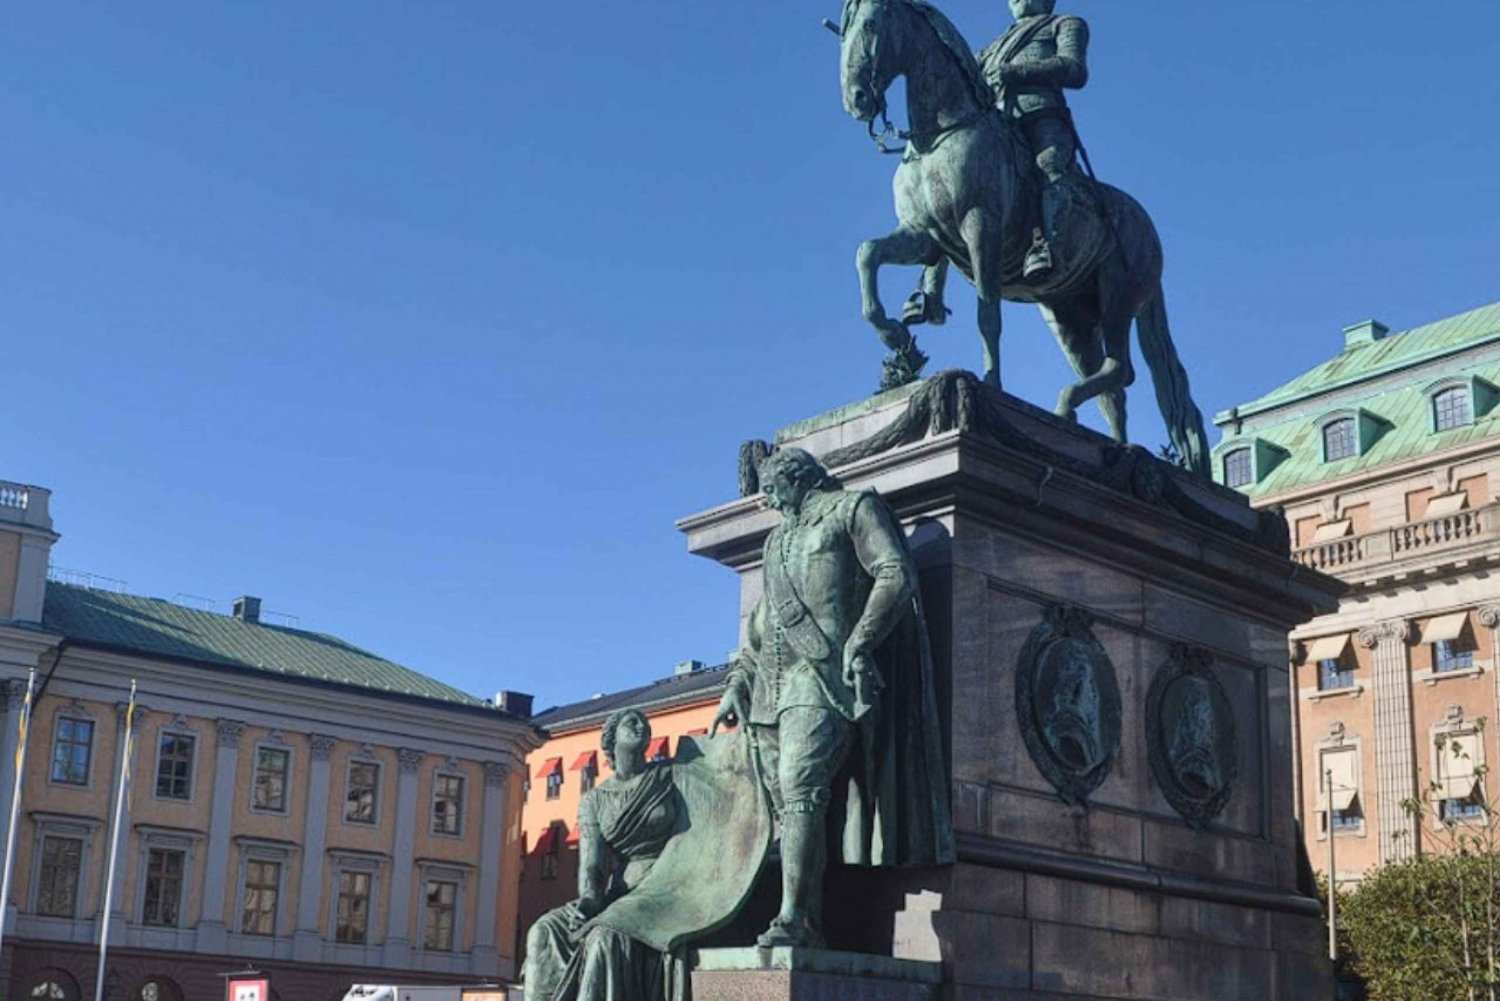 Vasa Museum & Carriage Ride Guided Tour with Entry Ticket